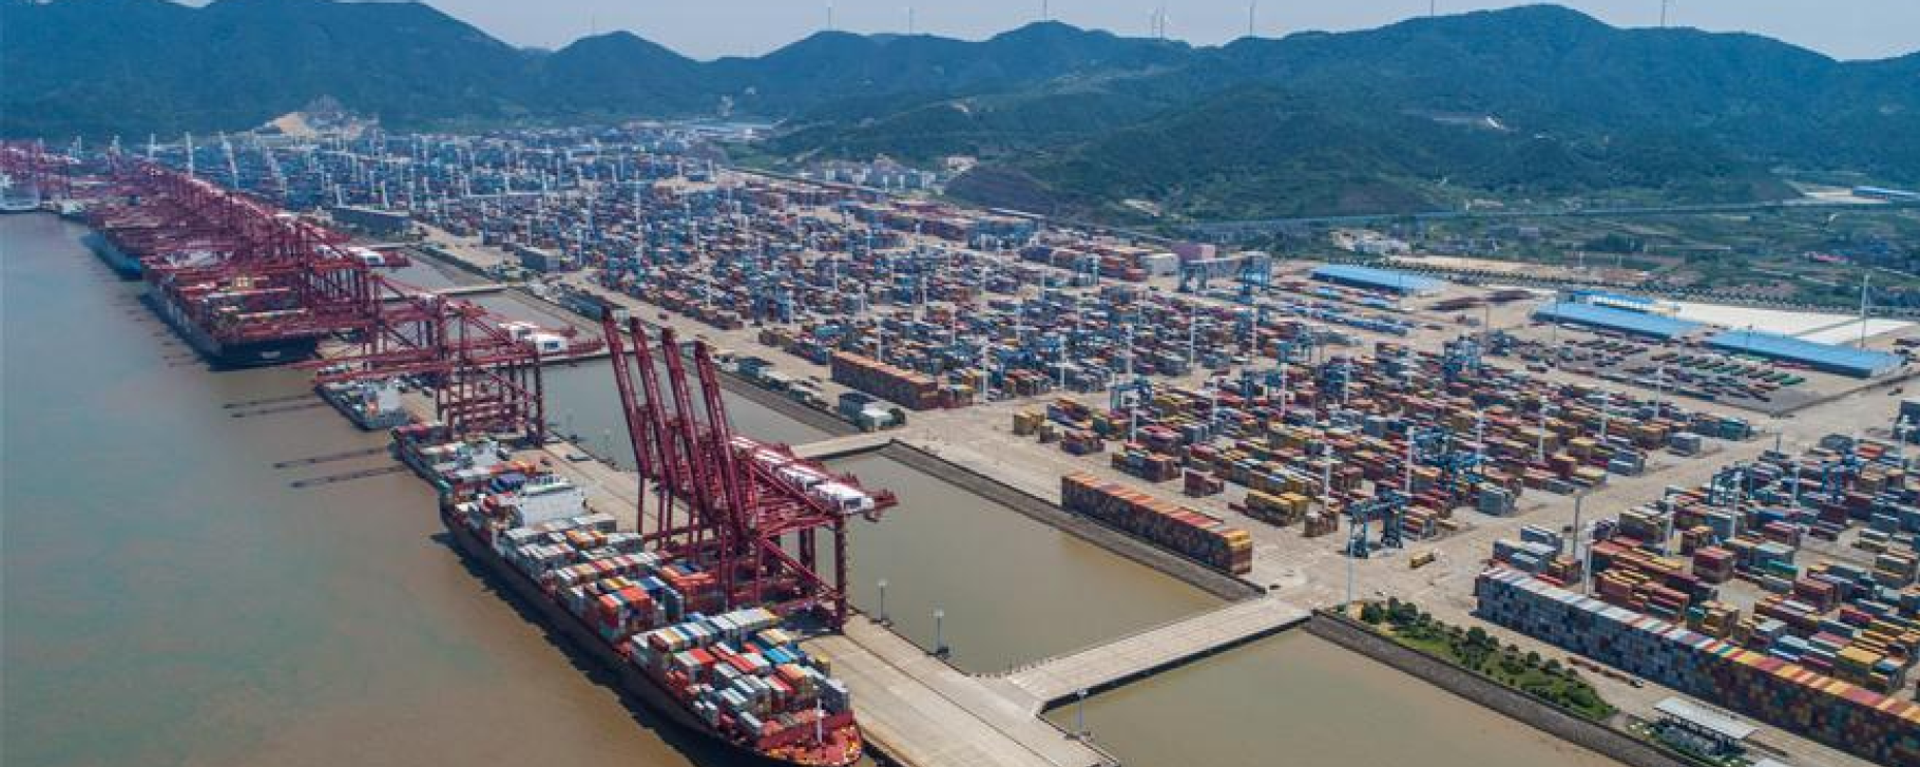 Aerial photo taken on July 12, 2017 shows the container pier of Zhoushan Port in Ningbo City, east China's Zhejiang Province. In the first half of 2017, Zhoushan Port handled 515 million tonnes cargoes, up 11.3 percent year-on-year, and 12.39 million TEU (twenty-foot equivalent unit) containers, up 14.6 percent year-on-year. - Sputnik India, 1920, 20.06.2023